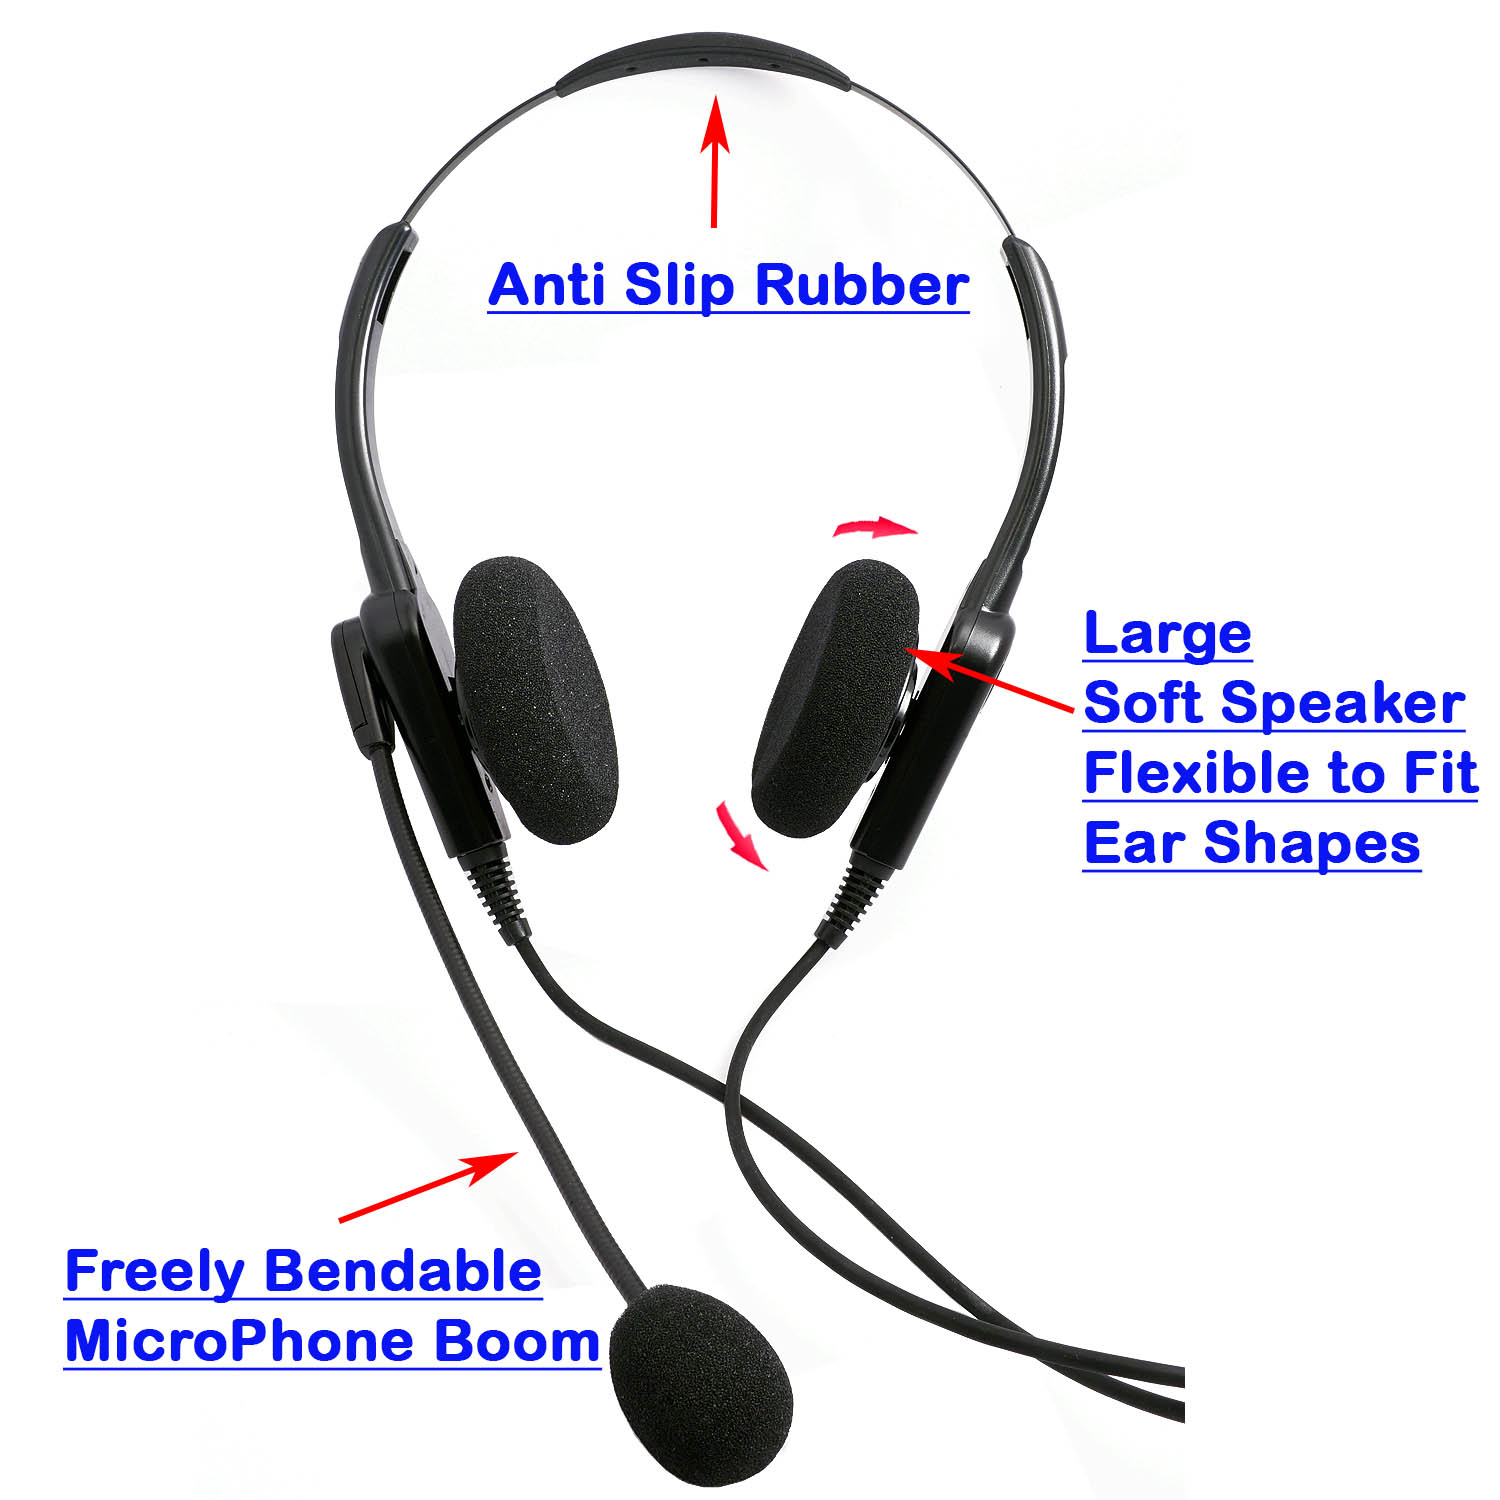 2.5 mm Quick Disconnect Plug Desk Phone headset for Cordless Phone like Vtech, Panasonic for Customer Service - image 5 of 7